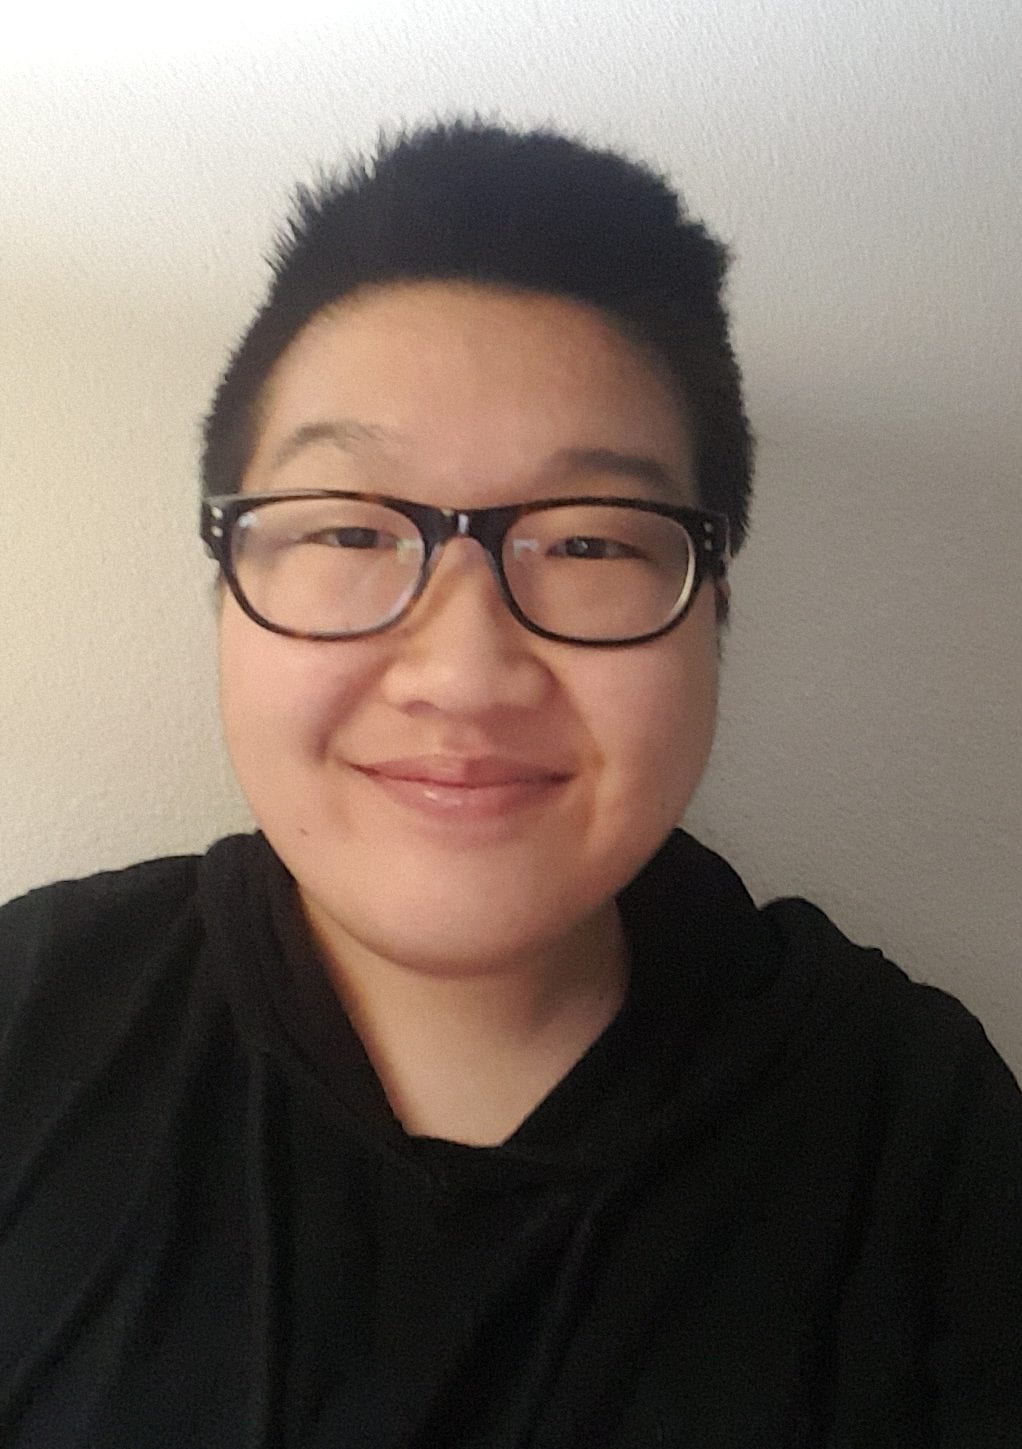 Cindy Liang (she/her)